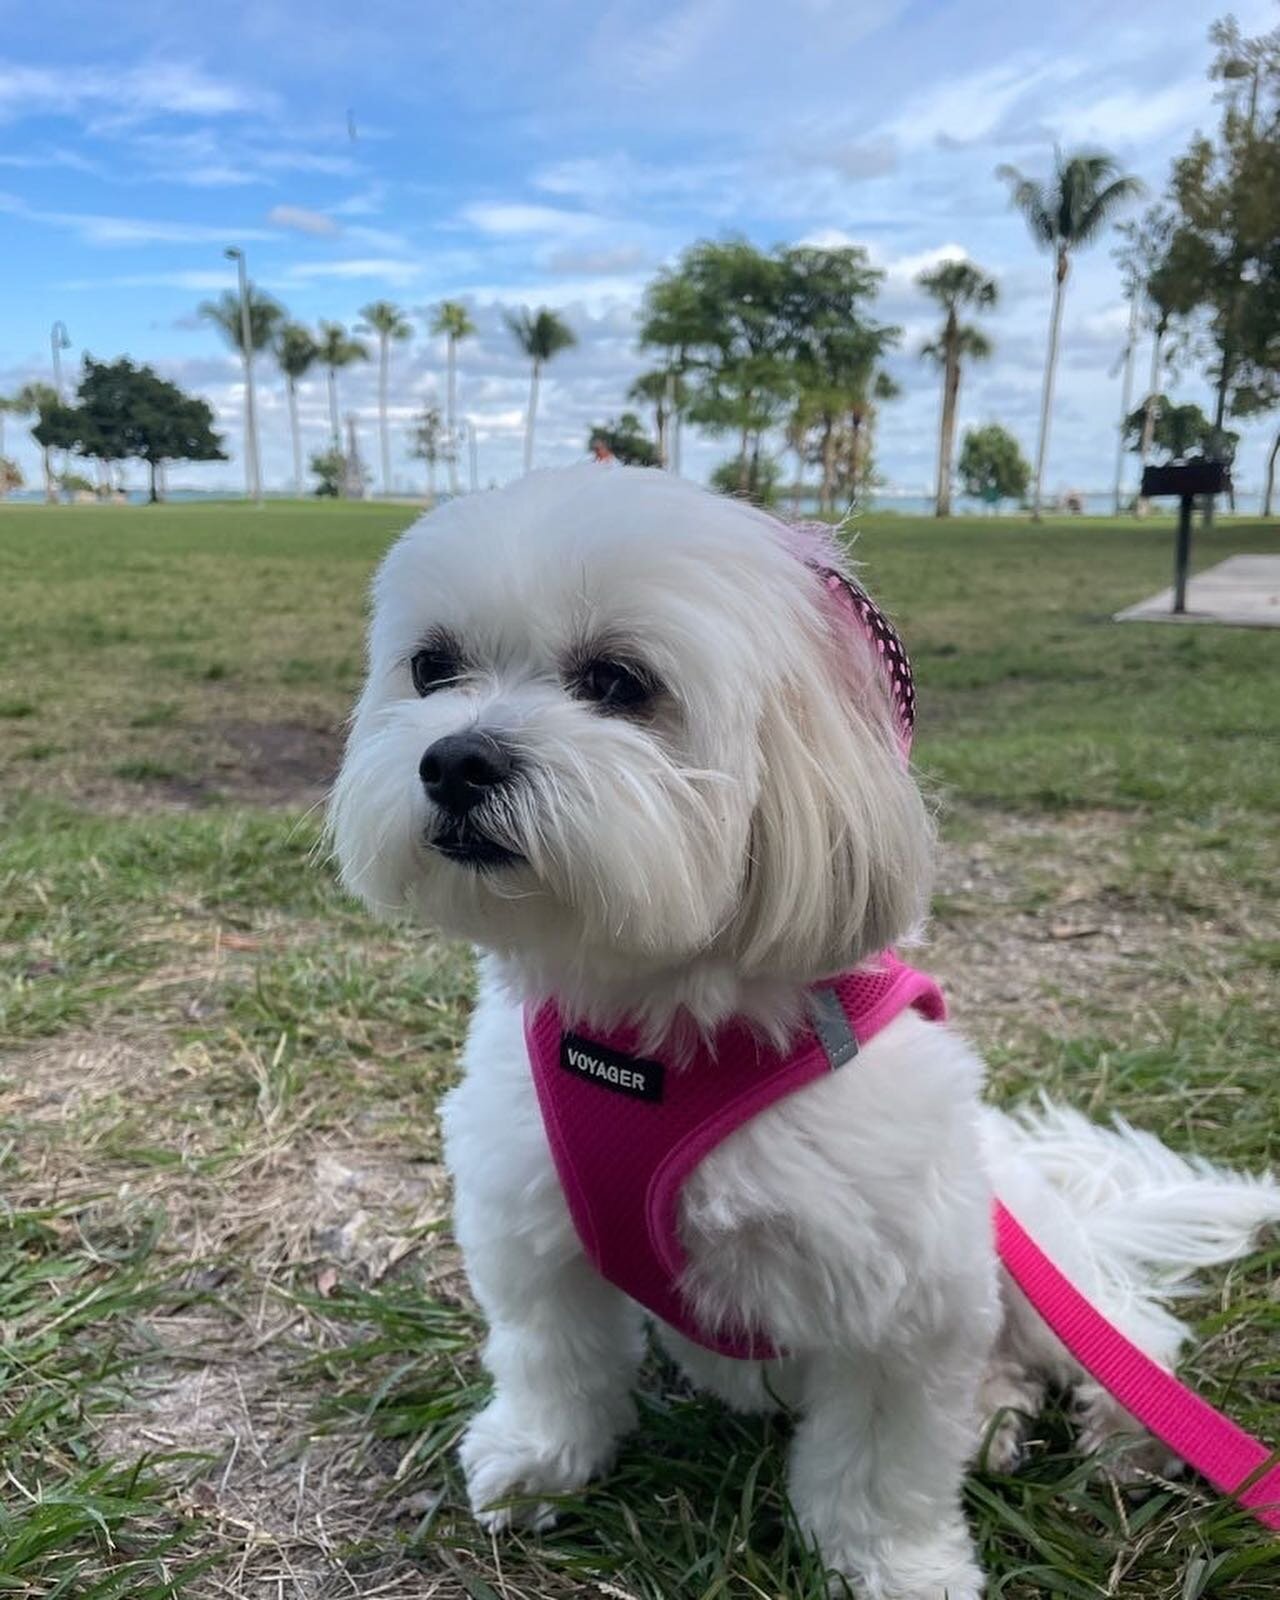 Happy Tuesday ☀️ Out in the streets or playing on the green, the PAWS are always PERFECT 🐾 🐶 🌈 @pawfectpalsmiami 
&bull;
&bull;
&bull;
&bull;
&bull;
#pawfectpalsmiami #pawfectpals #miamidogwalkers #miamipetsitters
#pawfectwalkers #pawfectmiami 
#m